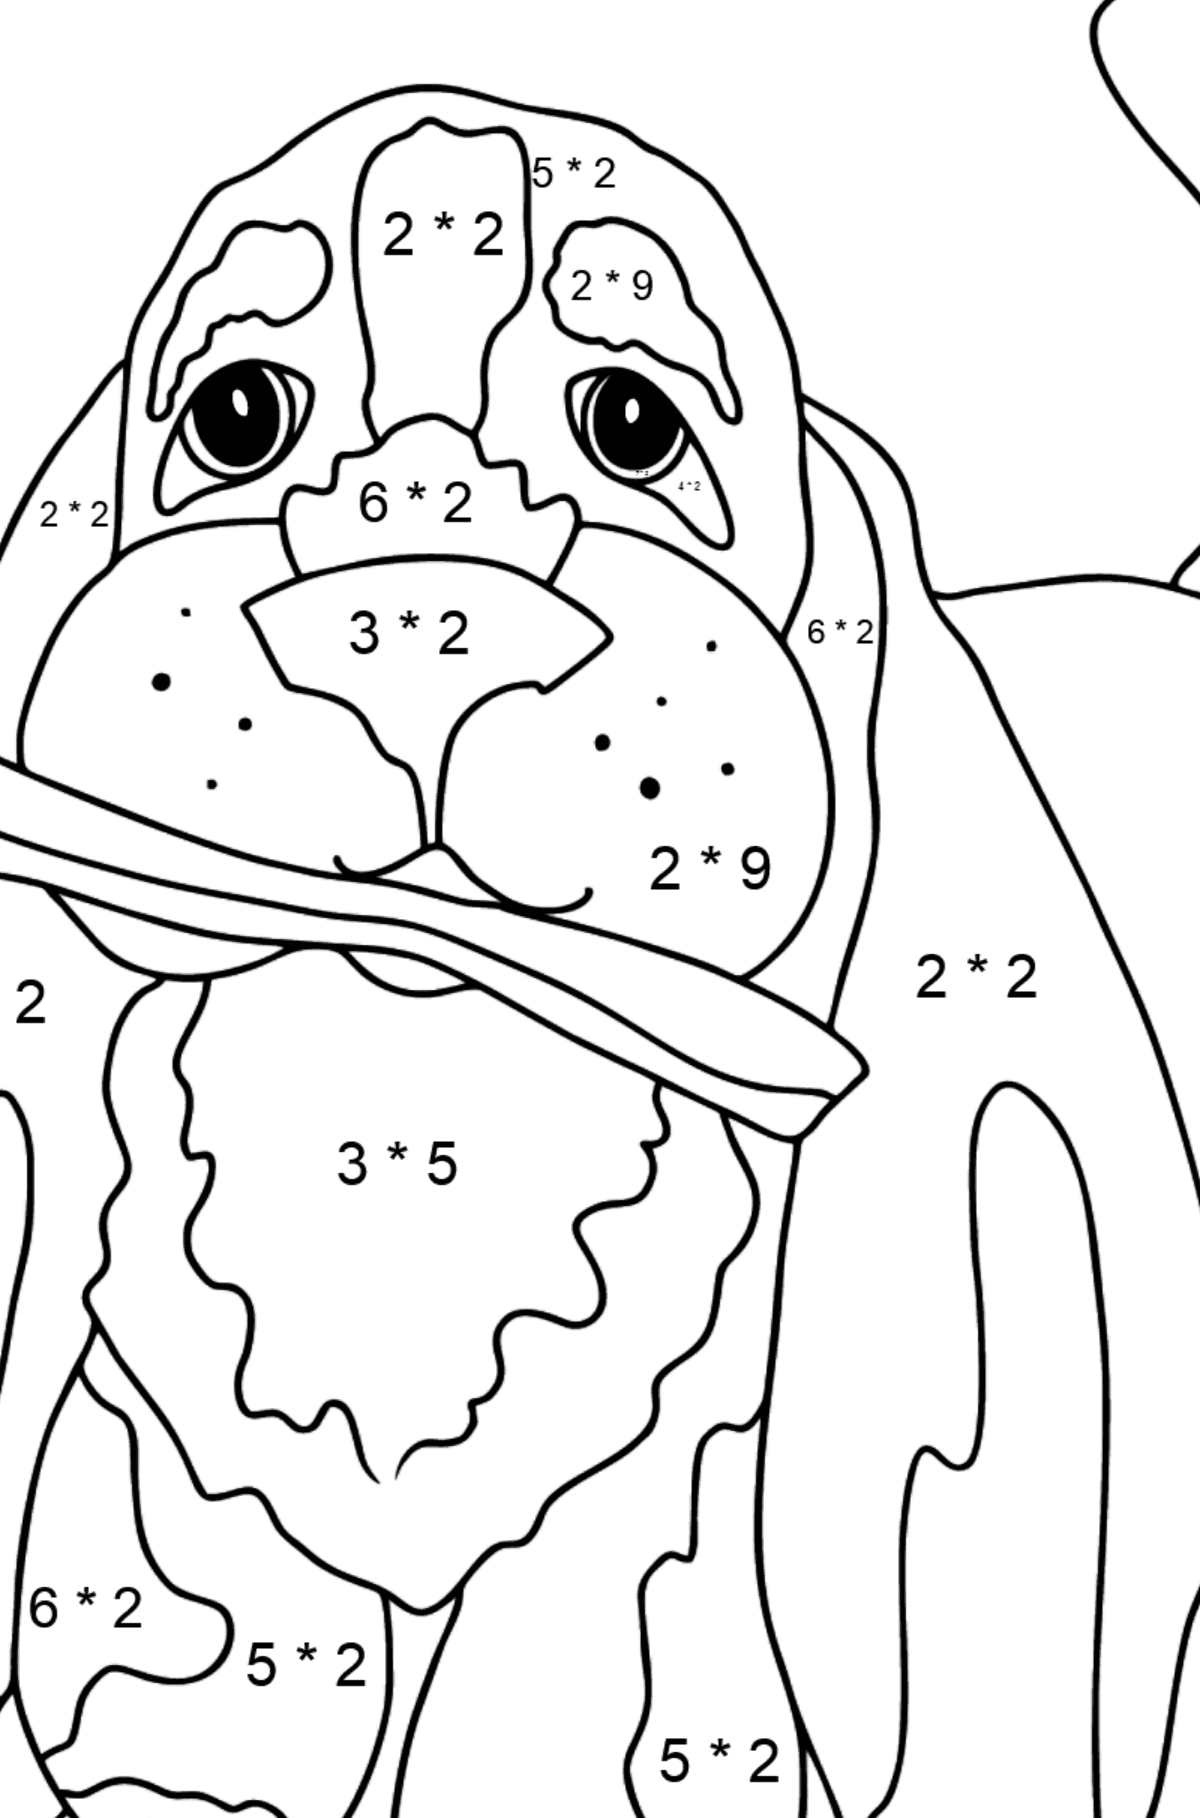 Coloring Page - A Dog is Waiting for Its Owner with a Stick - Math Coloring - Multiplication for Kids